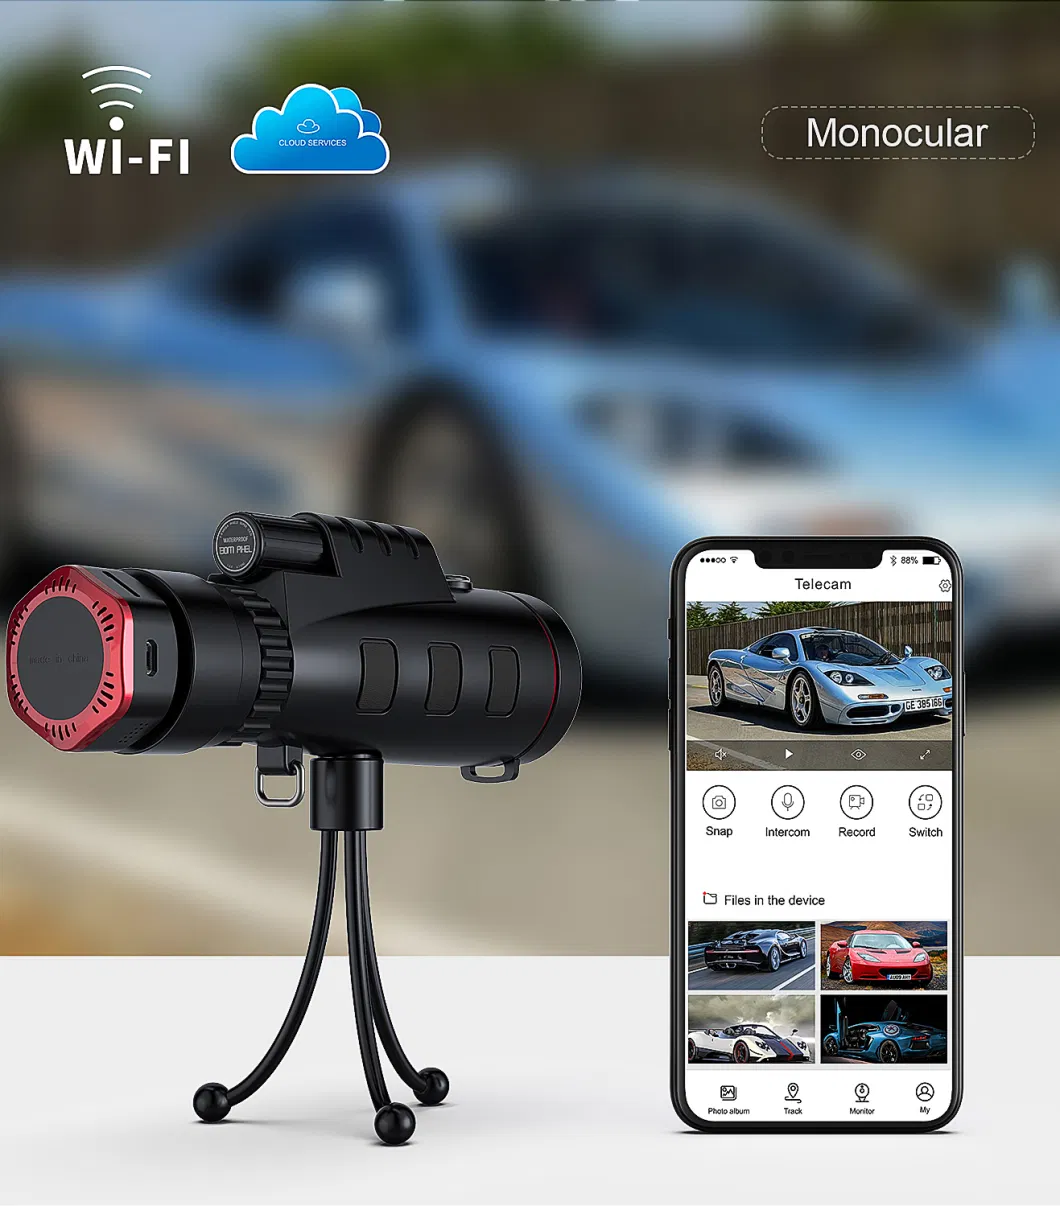 Visionking 1920X1080 Pixels CMOS Monochrome Astronomy Camera with USB WiFi APP